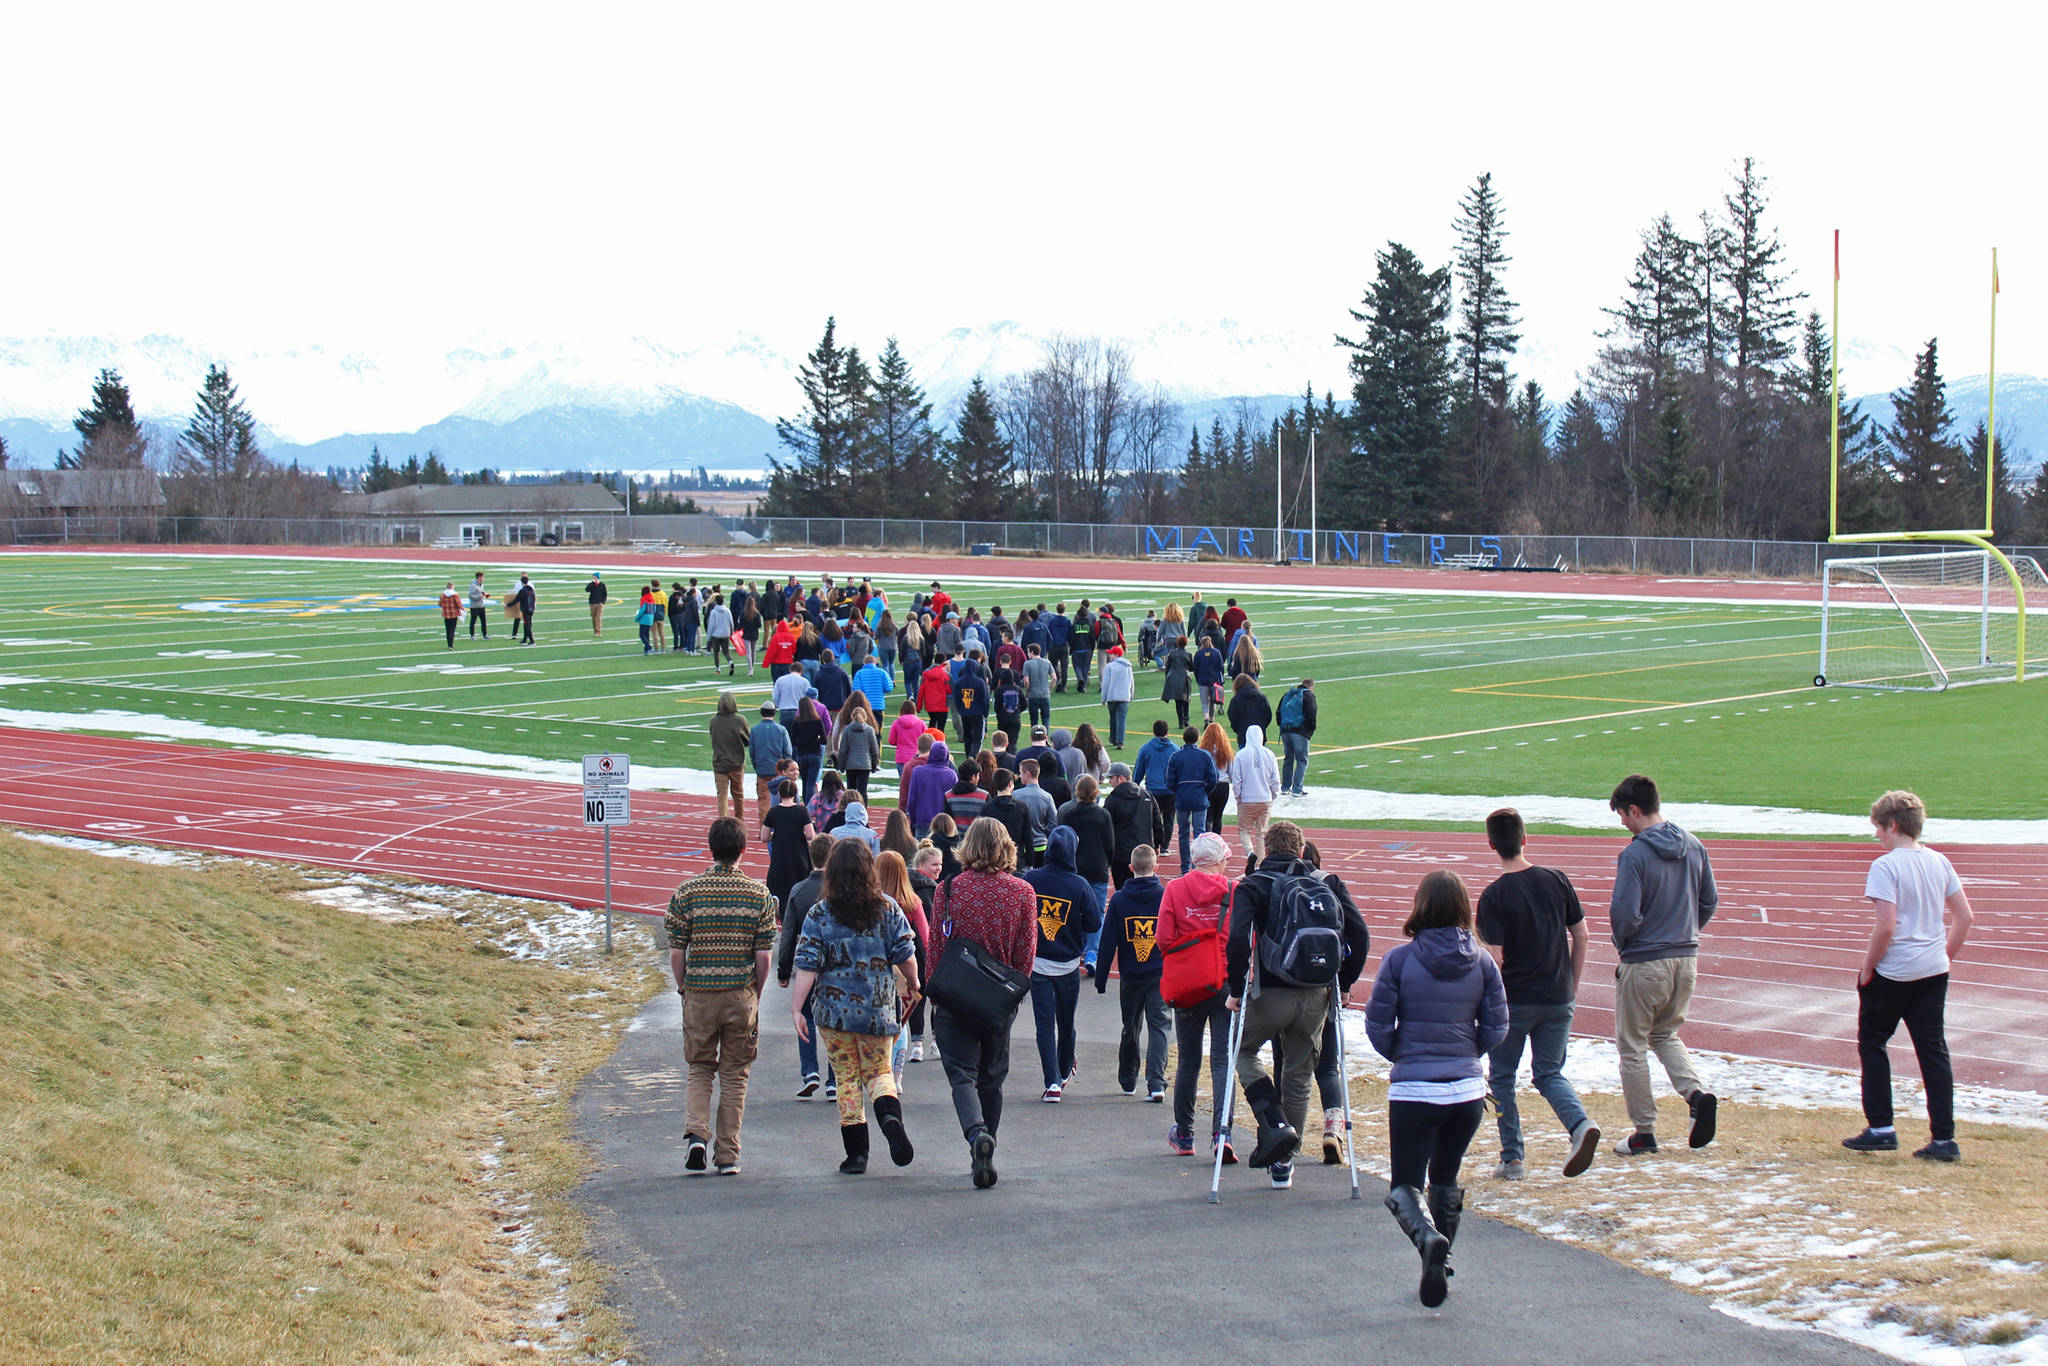 About 100 Homer High School students gather on the football field during a walkout staged Wednesday, Feb. 21, 2018 to protest for safer schools and honor the students killed in the Valentine’s Day mass shooting in Parkland, Florida. The students formed the number 17 with their bodies on the field. (Photo by Megan Pacer/Homer News)